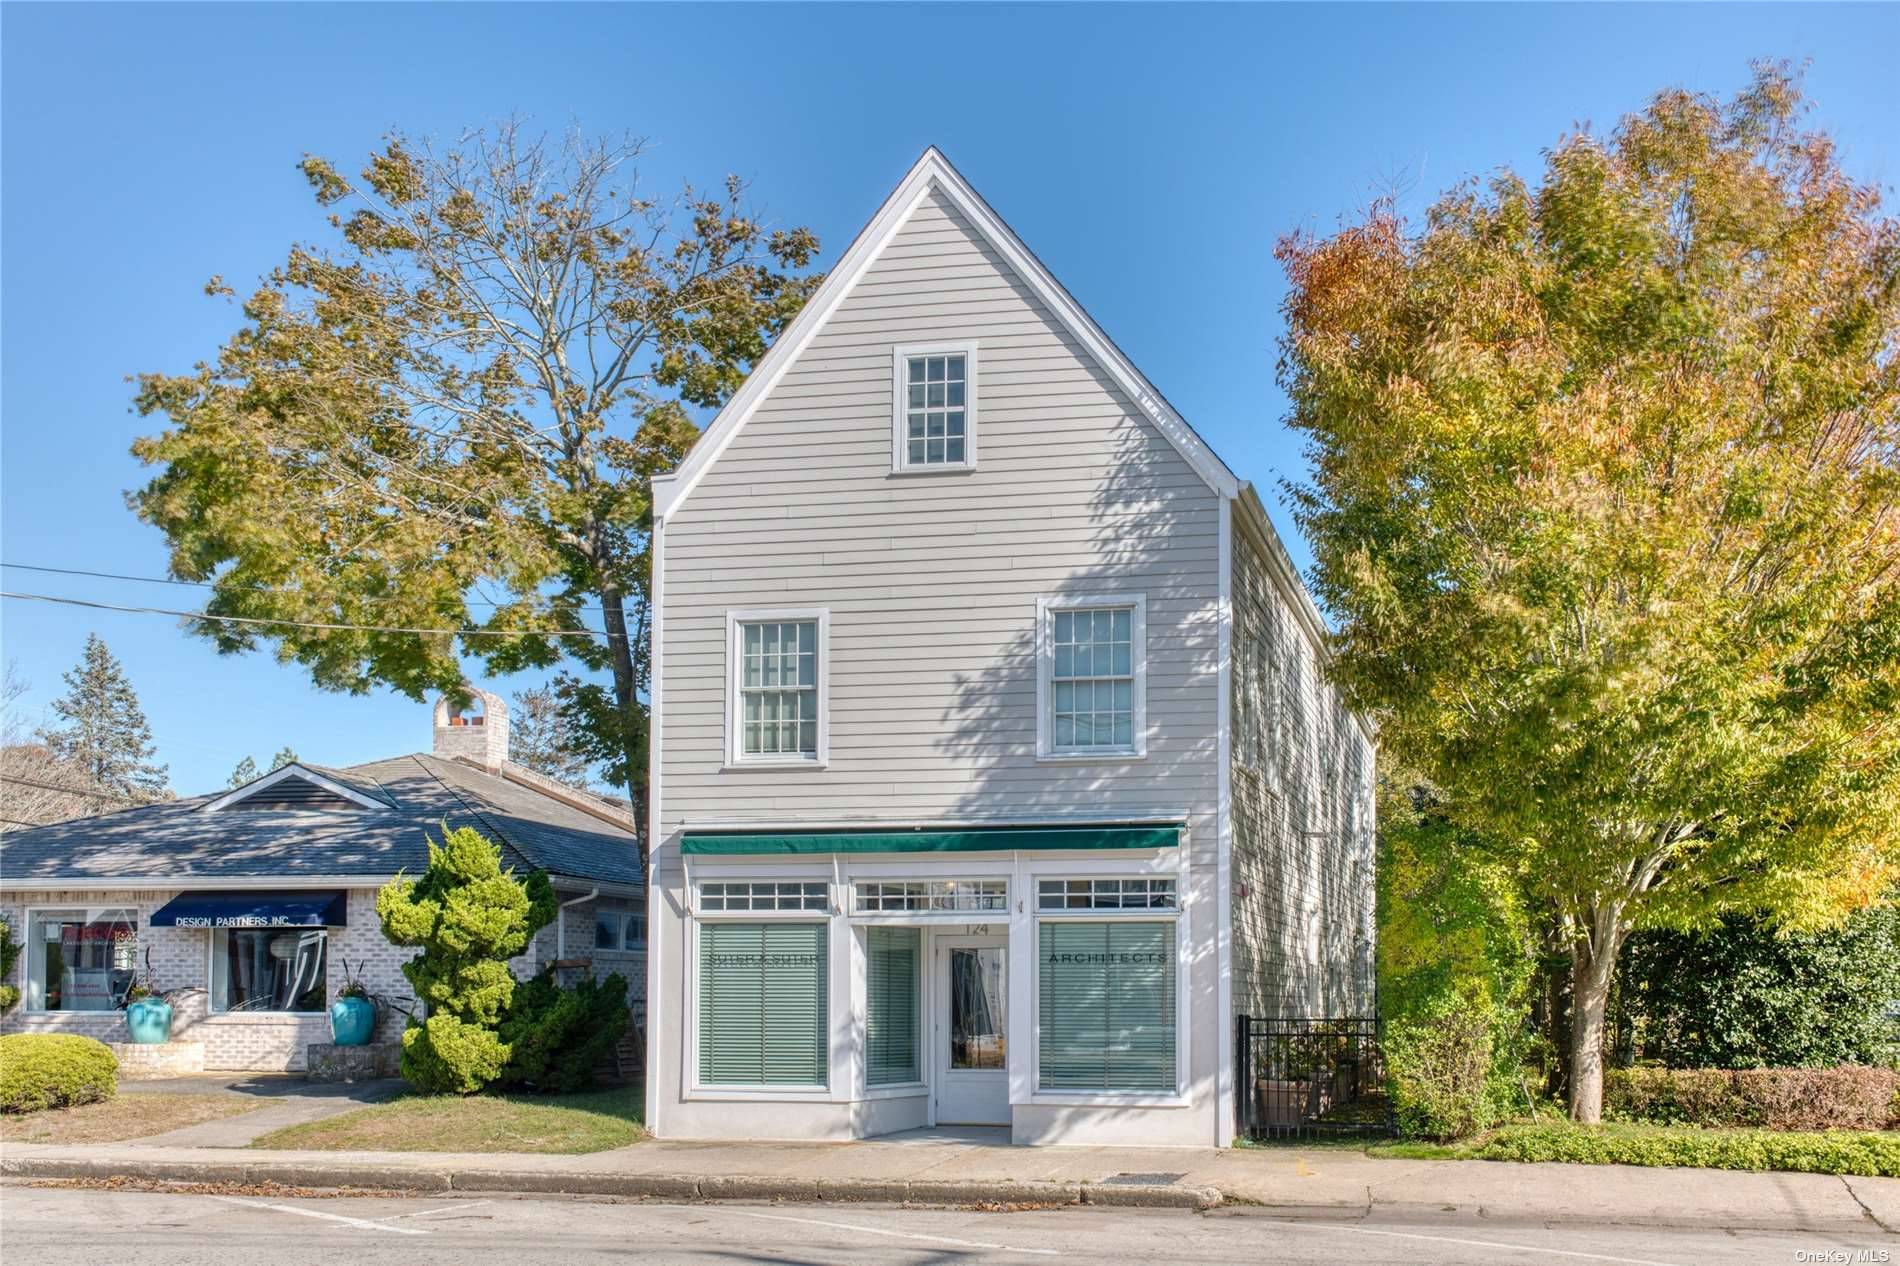 Quogue office professional space, located in the heart of the Village, is offered for year round lease.